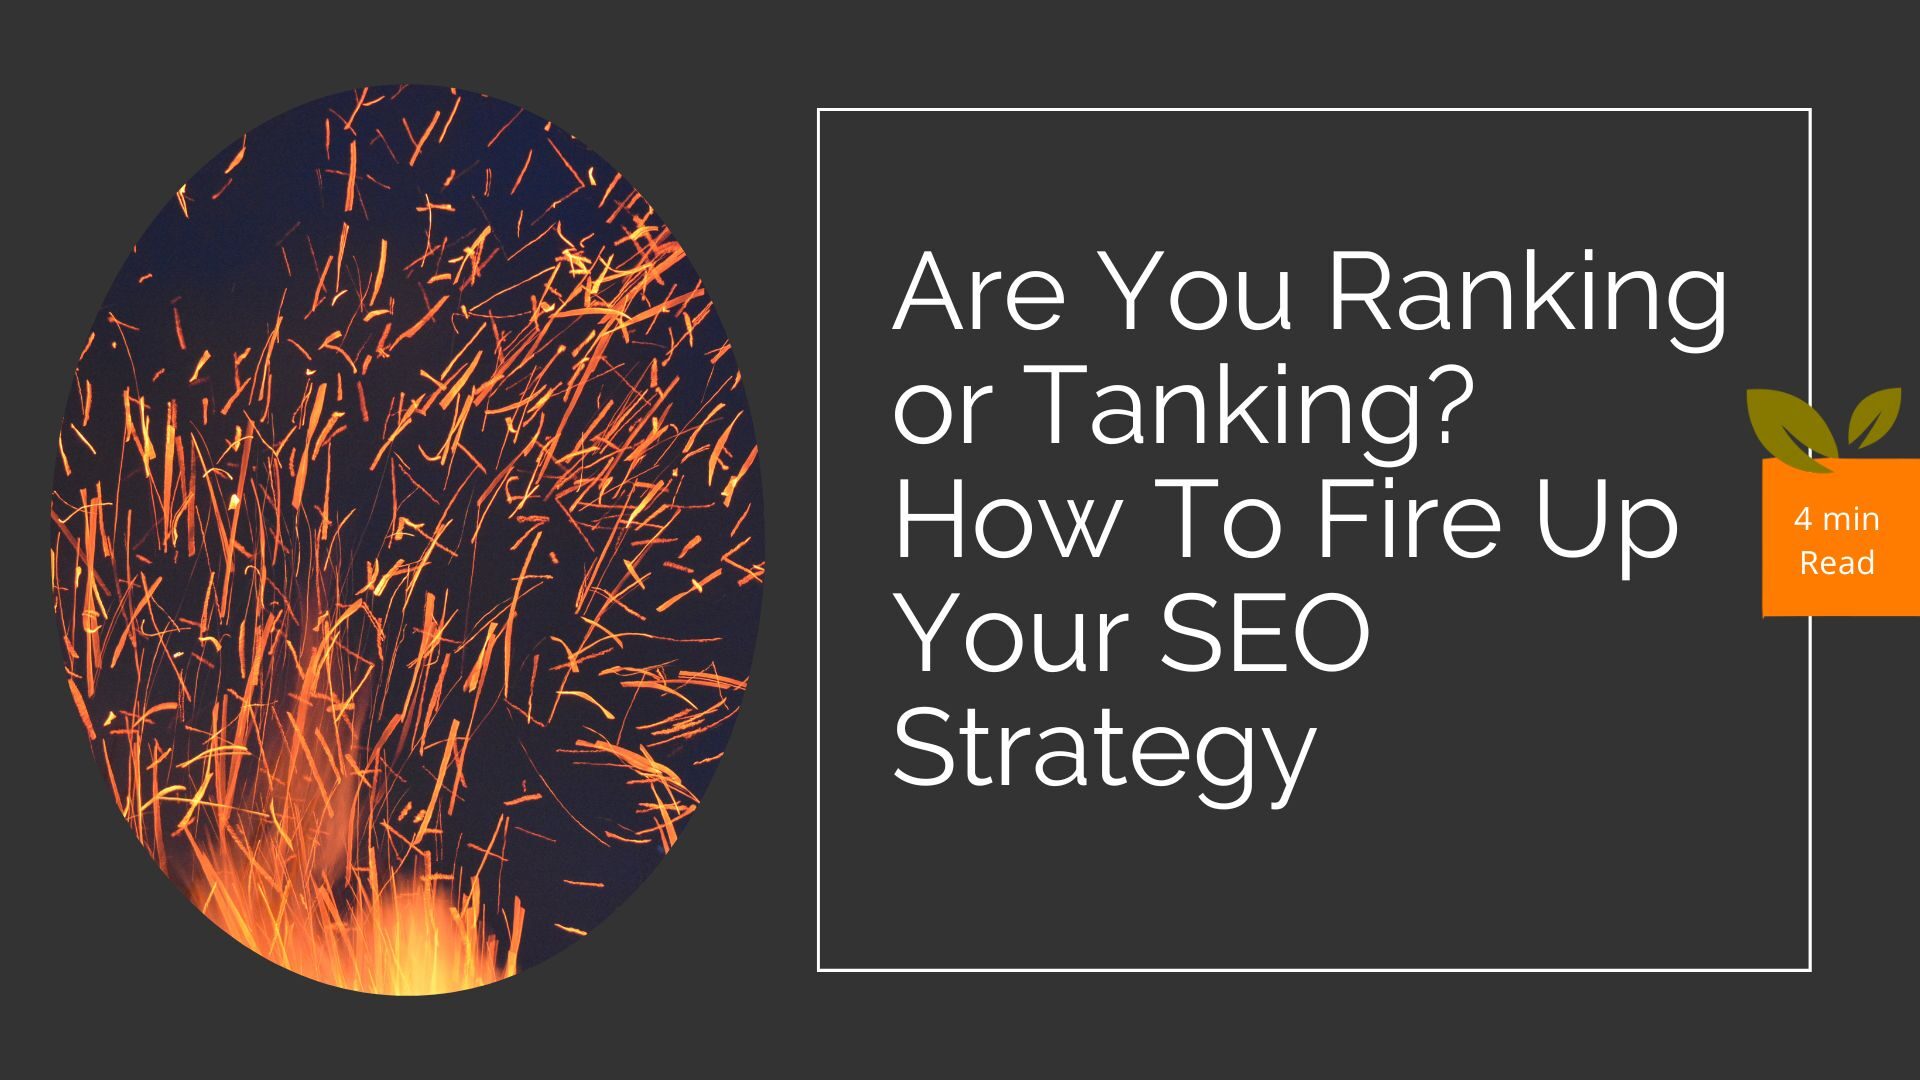 Ranking or Tanking? Fire Up Your SEO Strategy Process